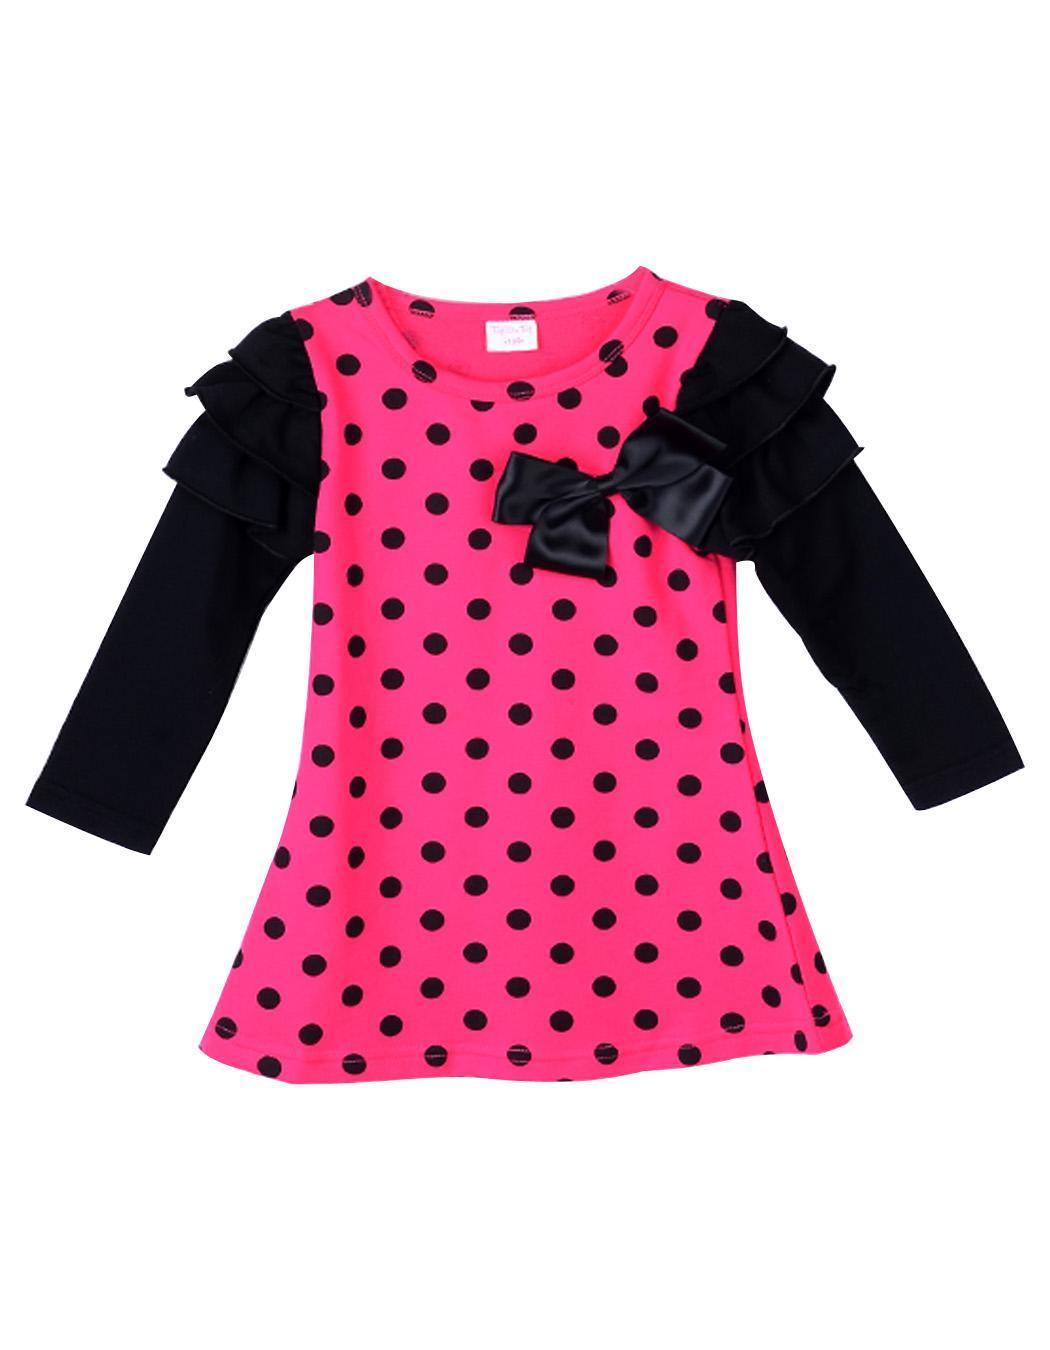 New Children Clothes Cute Girls Princess Lovely Dots One Piece Dress sz2 7Y